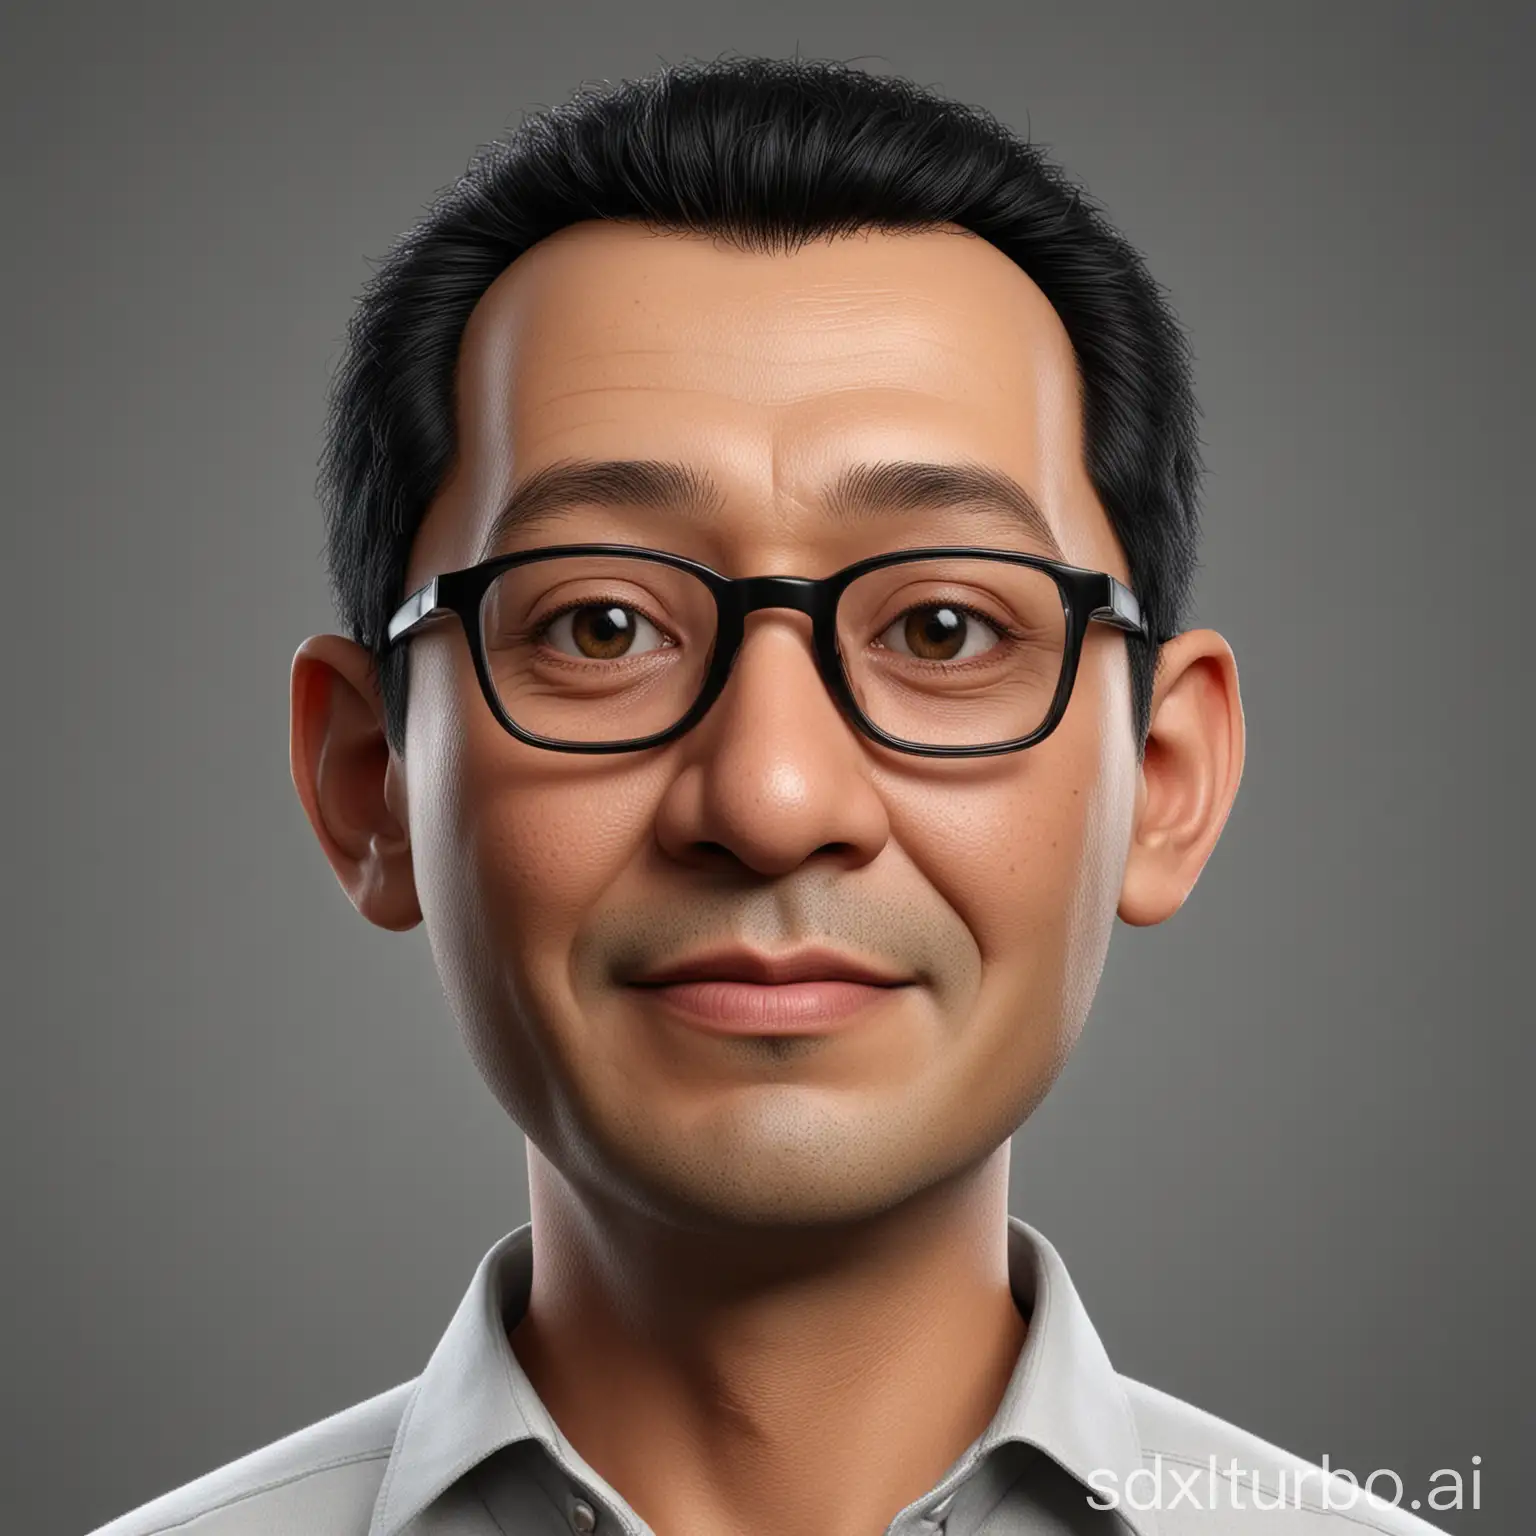 Hyperrealistic 3D cartoon with a big head. A 50 year old Indonesian man. Tall, slightly thin body, oval face shape. Wearing glasses, oval chin, handsome, slightly round eyes, clean white skin, faint smile. Black hair with a side part. Wearing a white shirt. Body position is clearly visible. Grey solid background. Use soft photography lighting, hair lighting, top lighting, side lighting. Highest quality photos.